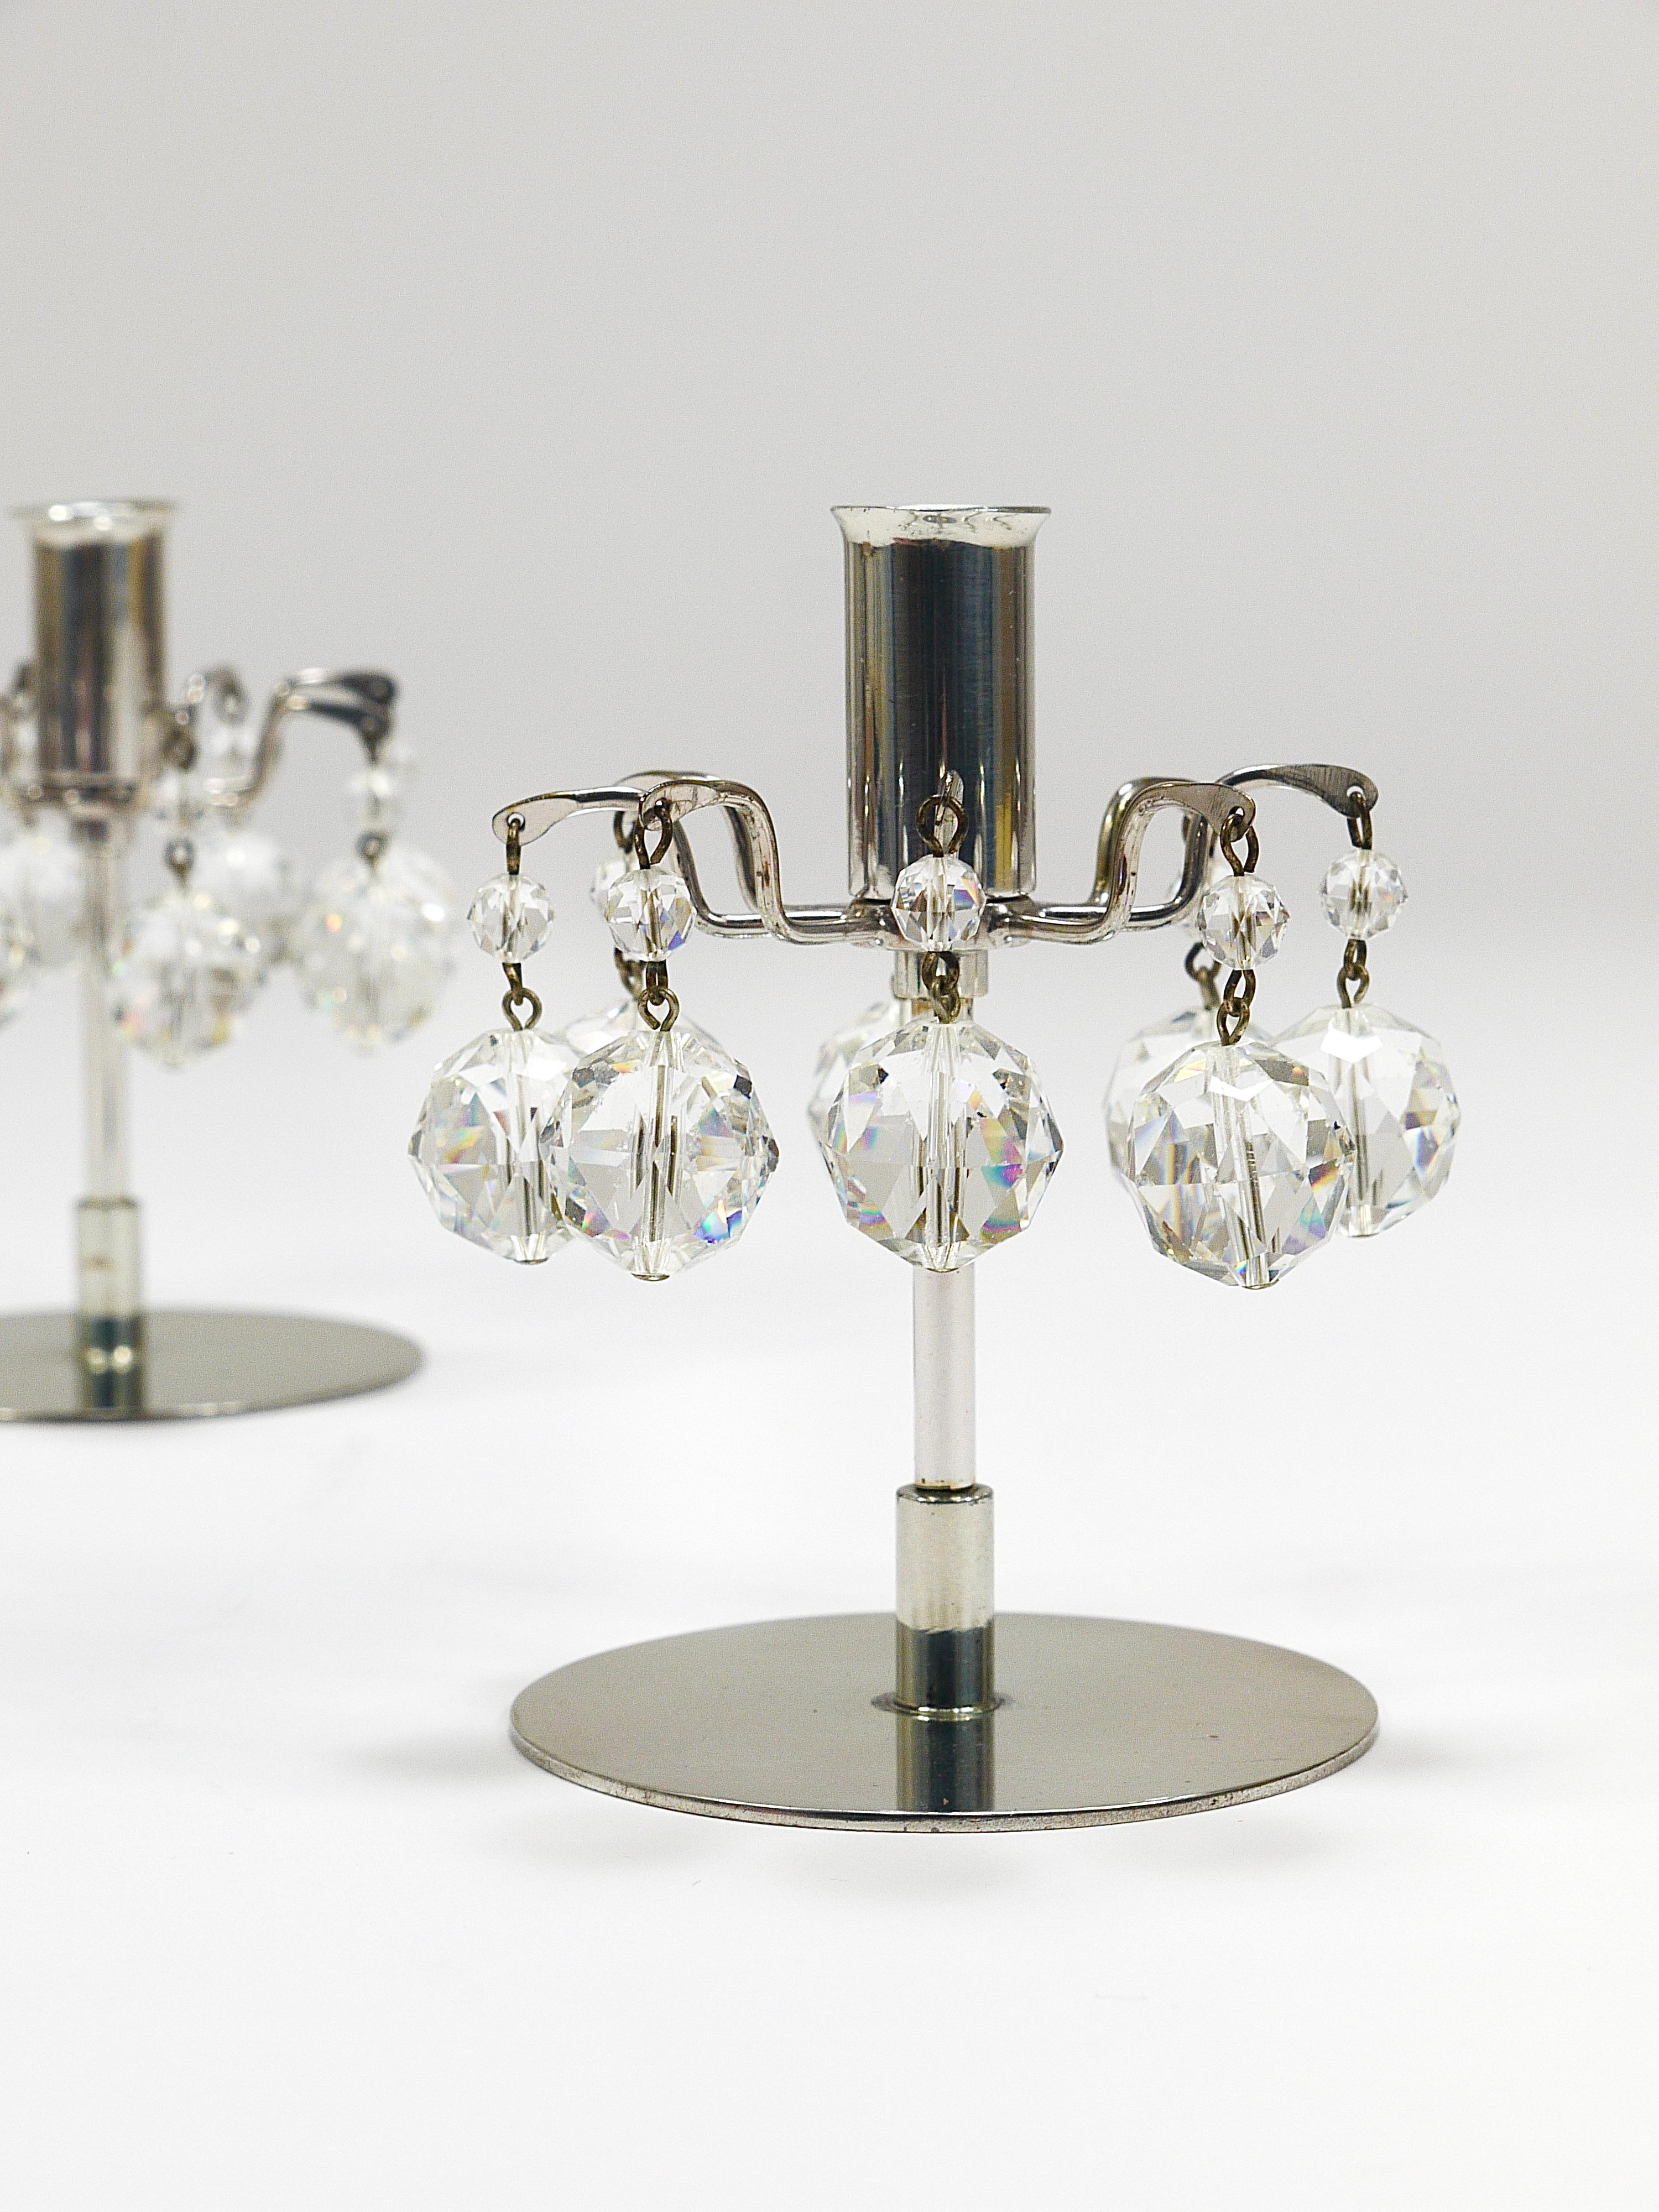 Delightful pair of petite Mid-Century modernist candle holders / candlesticks, designed in 1963 by Hans Harald Rath and manufactured by J. L. Lobmeyr Vienna/Austria in the 1980s. Crafted from nickel-plated brass adorned with sparkling Swarovski